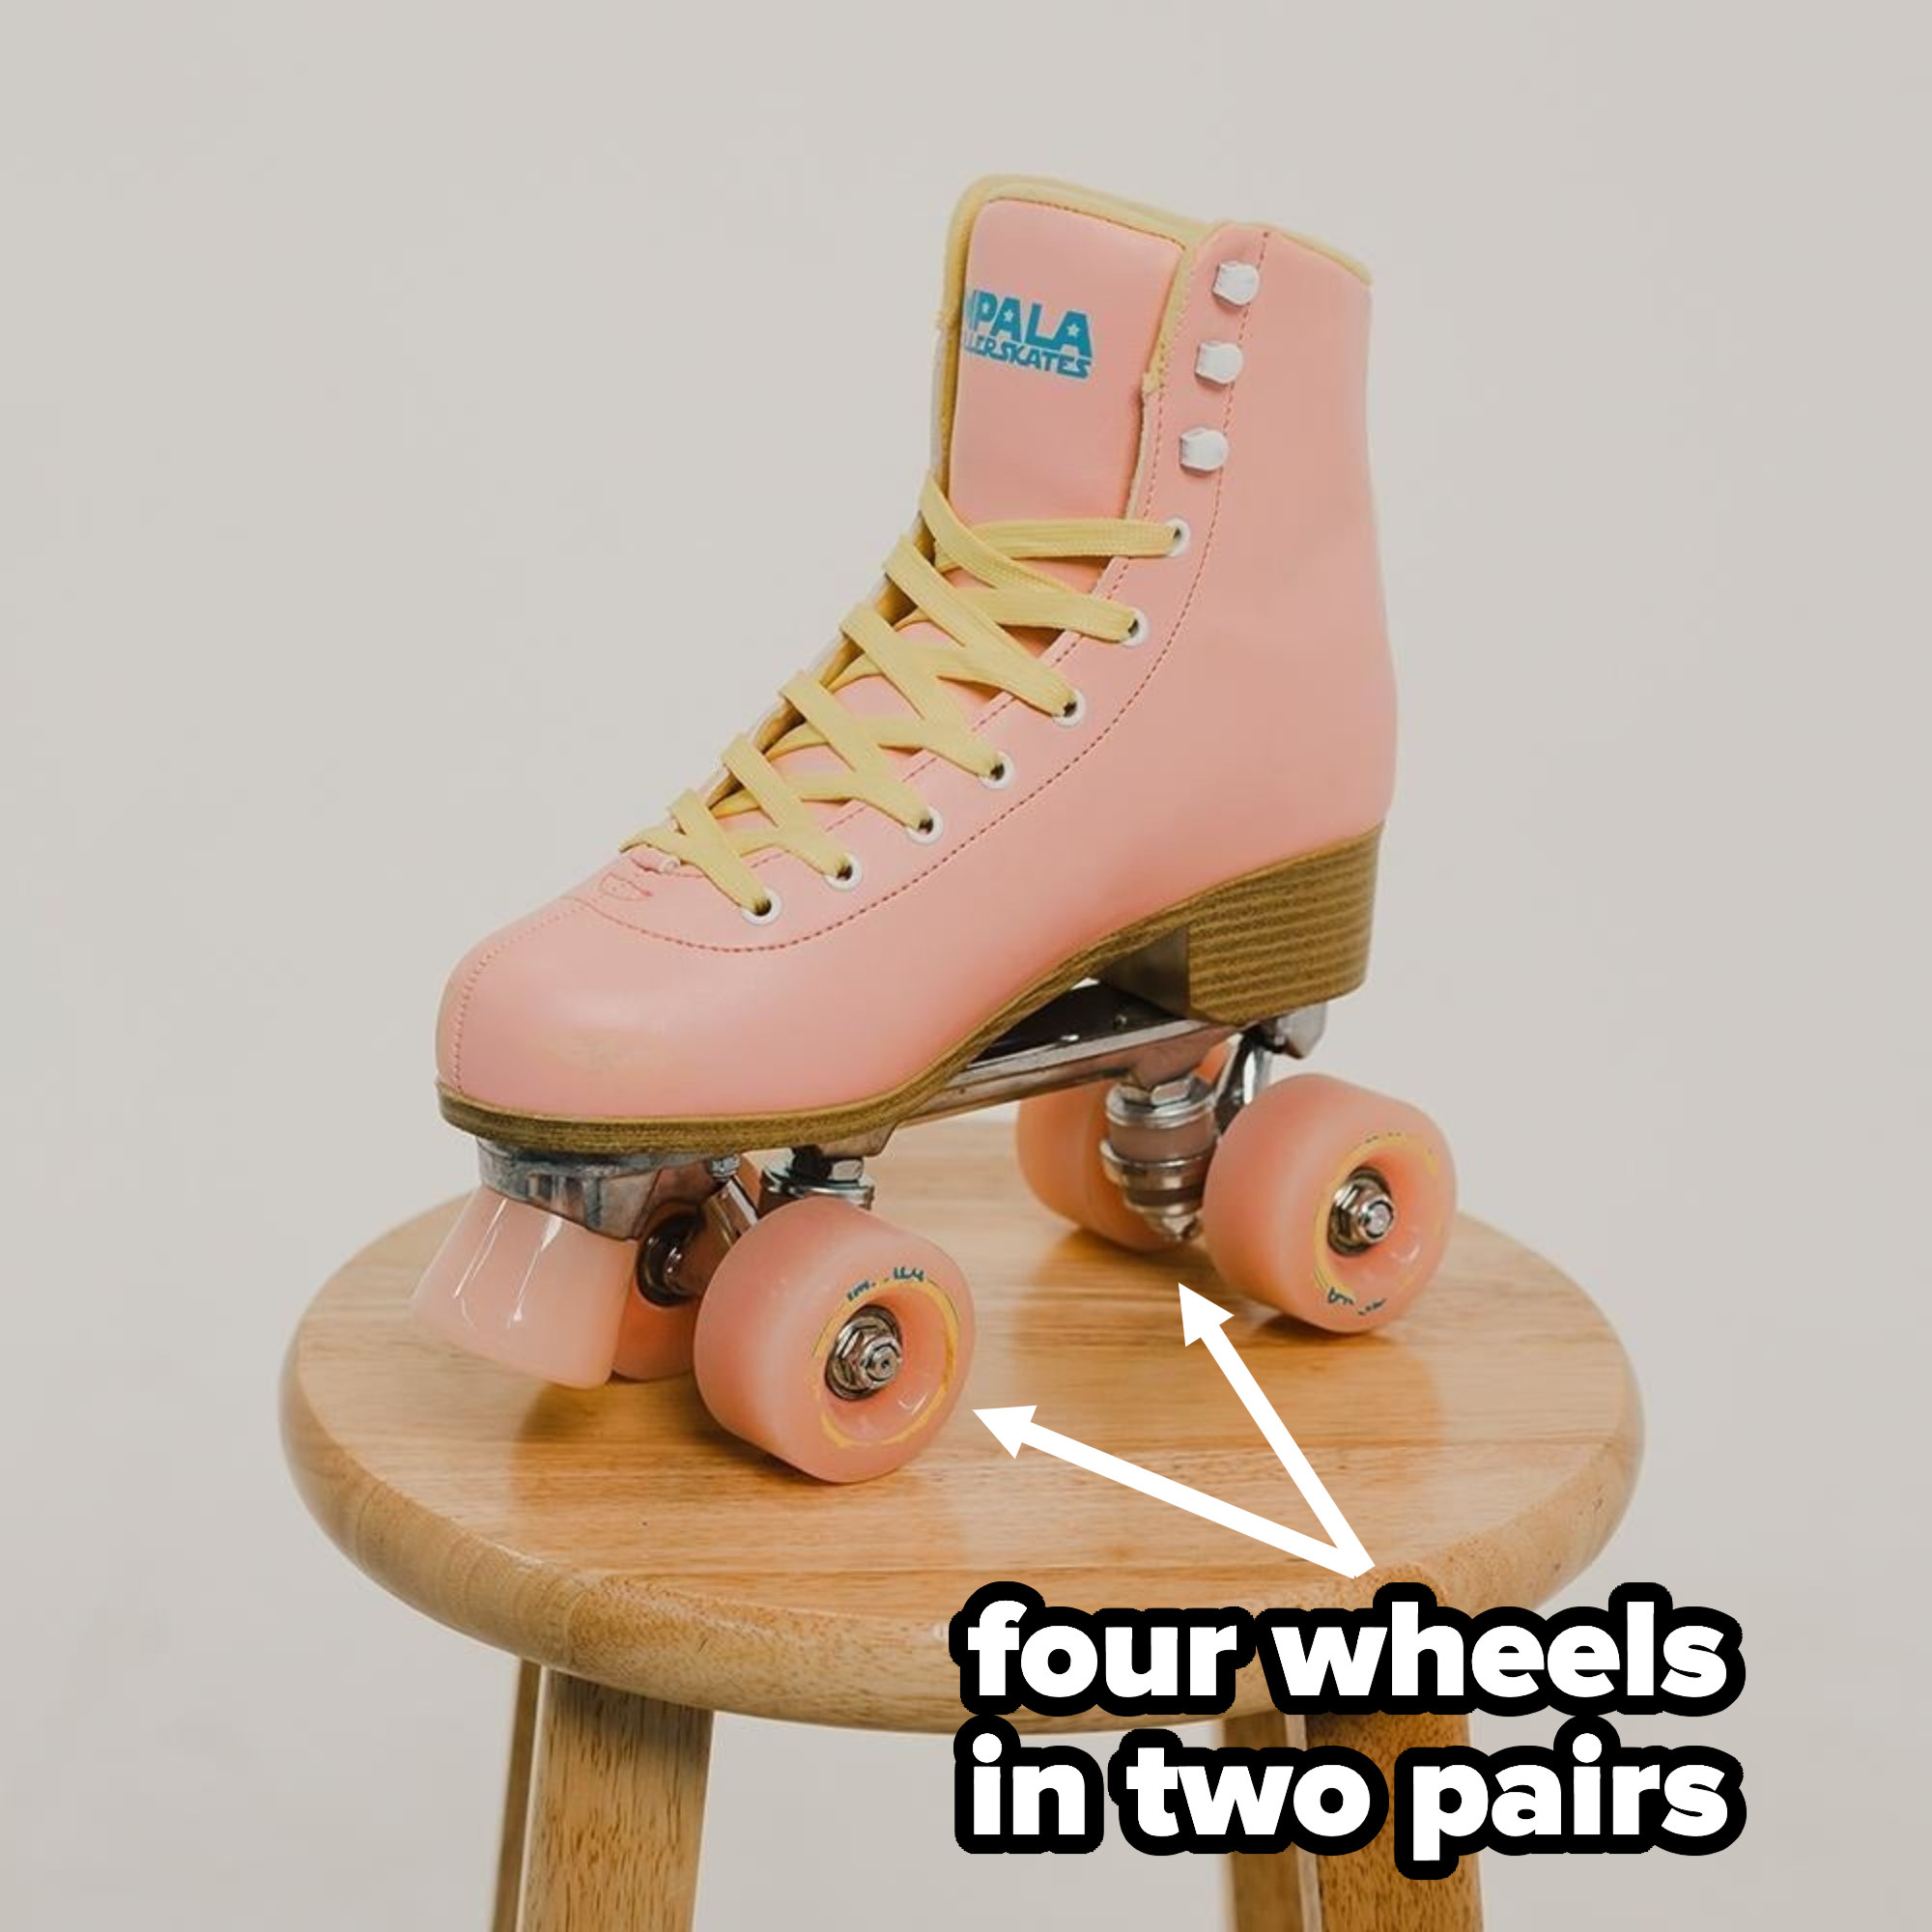 How To Roller Skate In 2020: Gear 